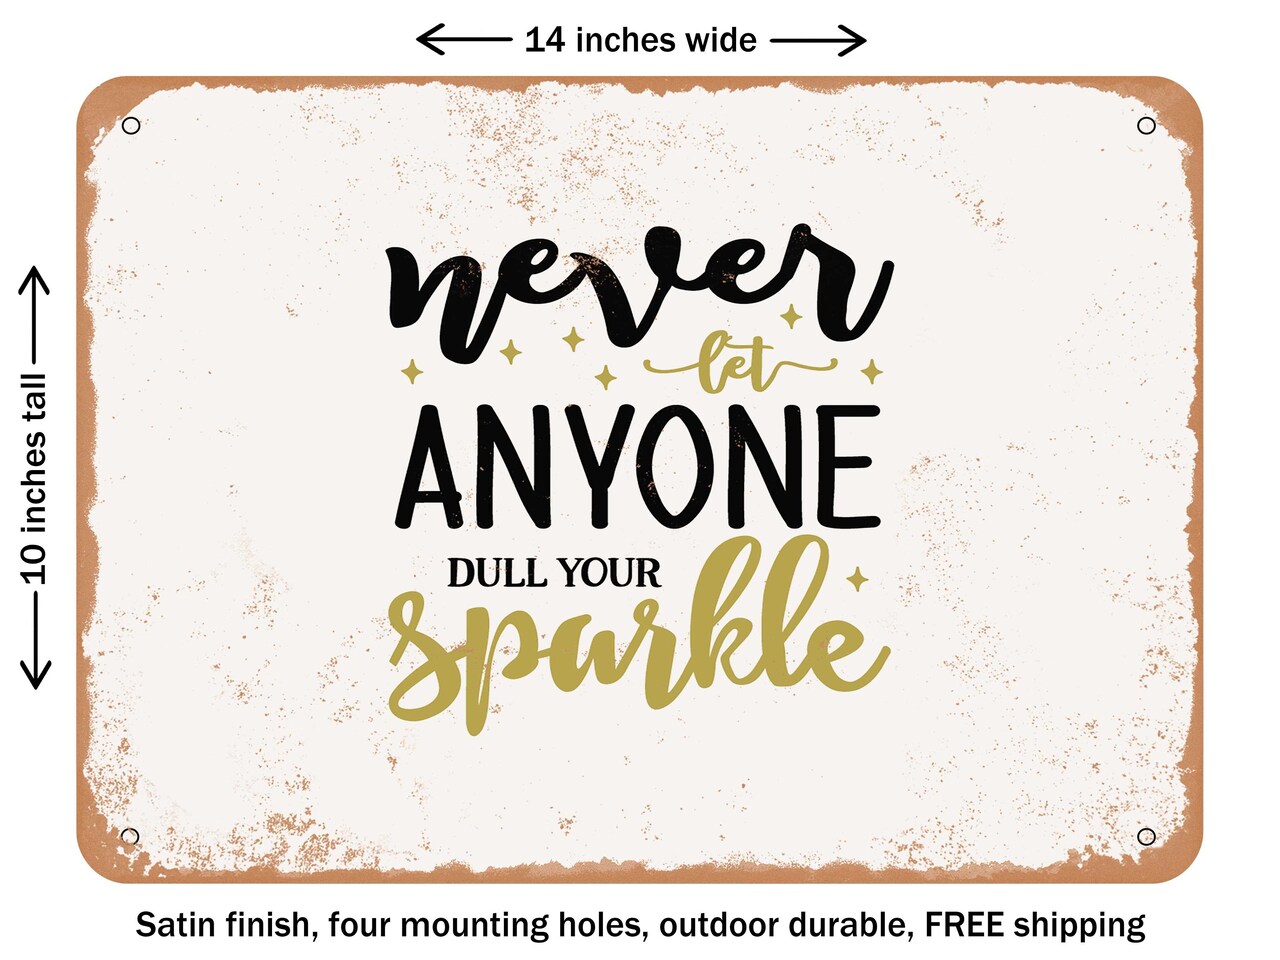 DECORATIVE METAL SIGN - Never Let Anyone Dull Your Sparkle - 2 - Vintage Rusty Look